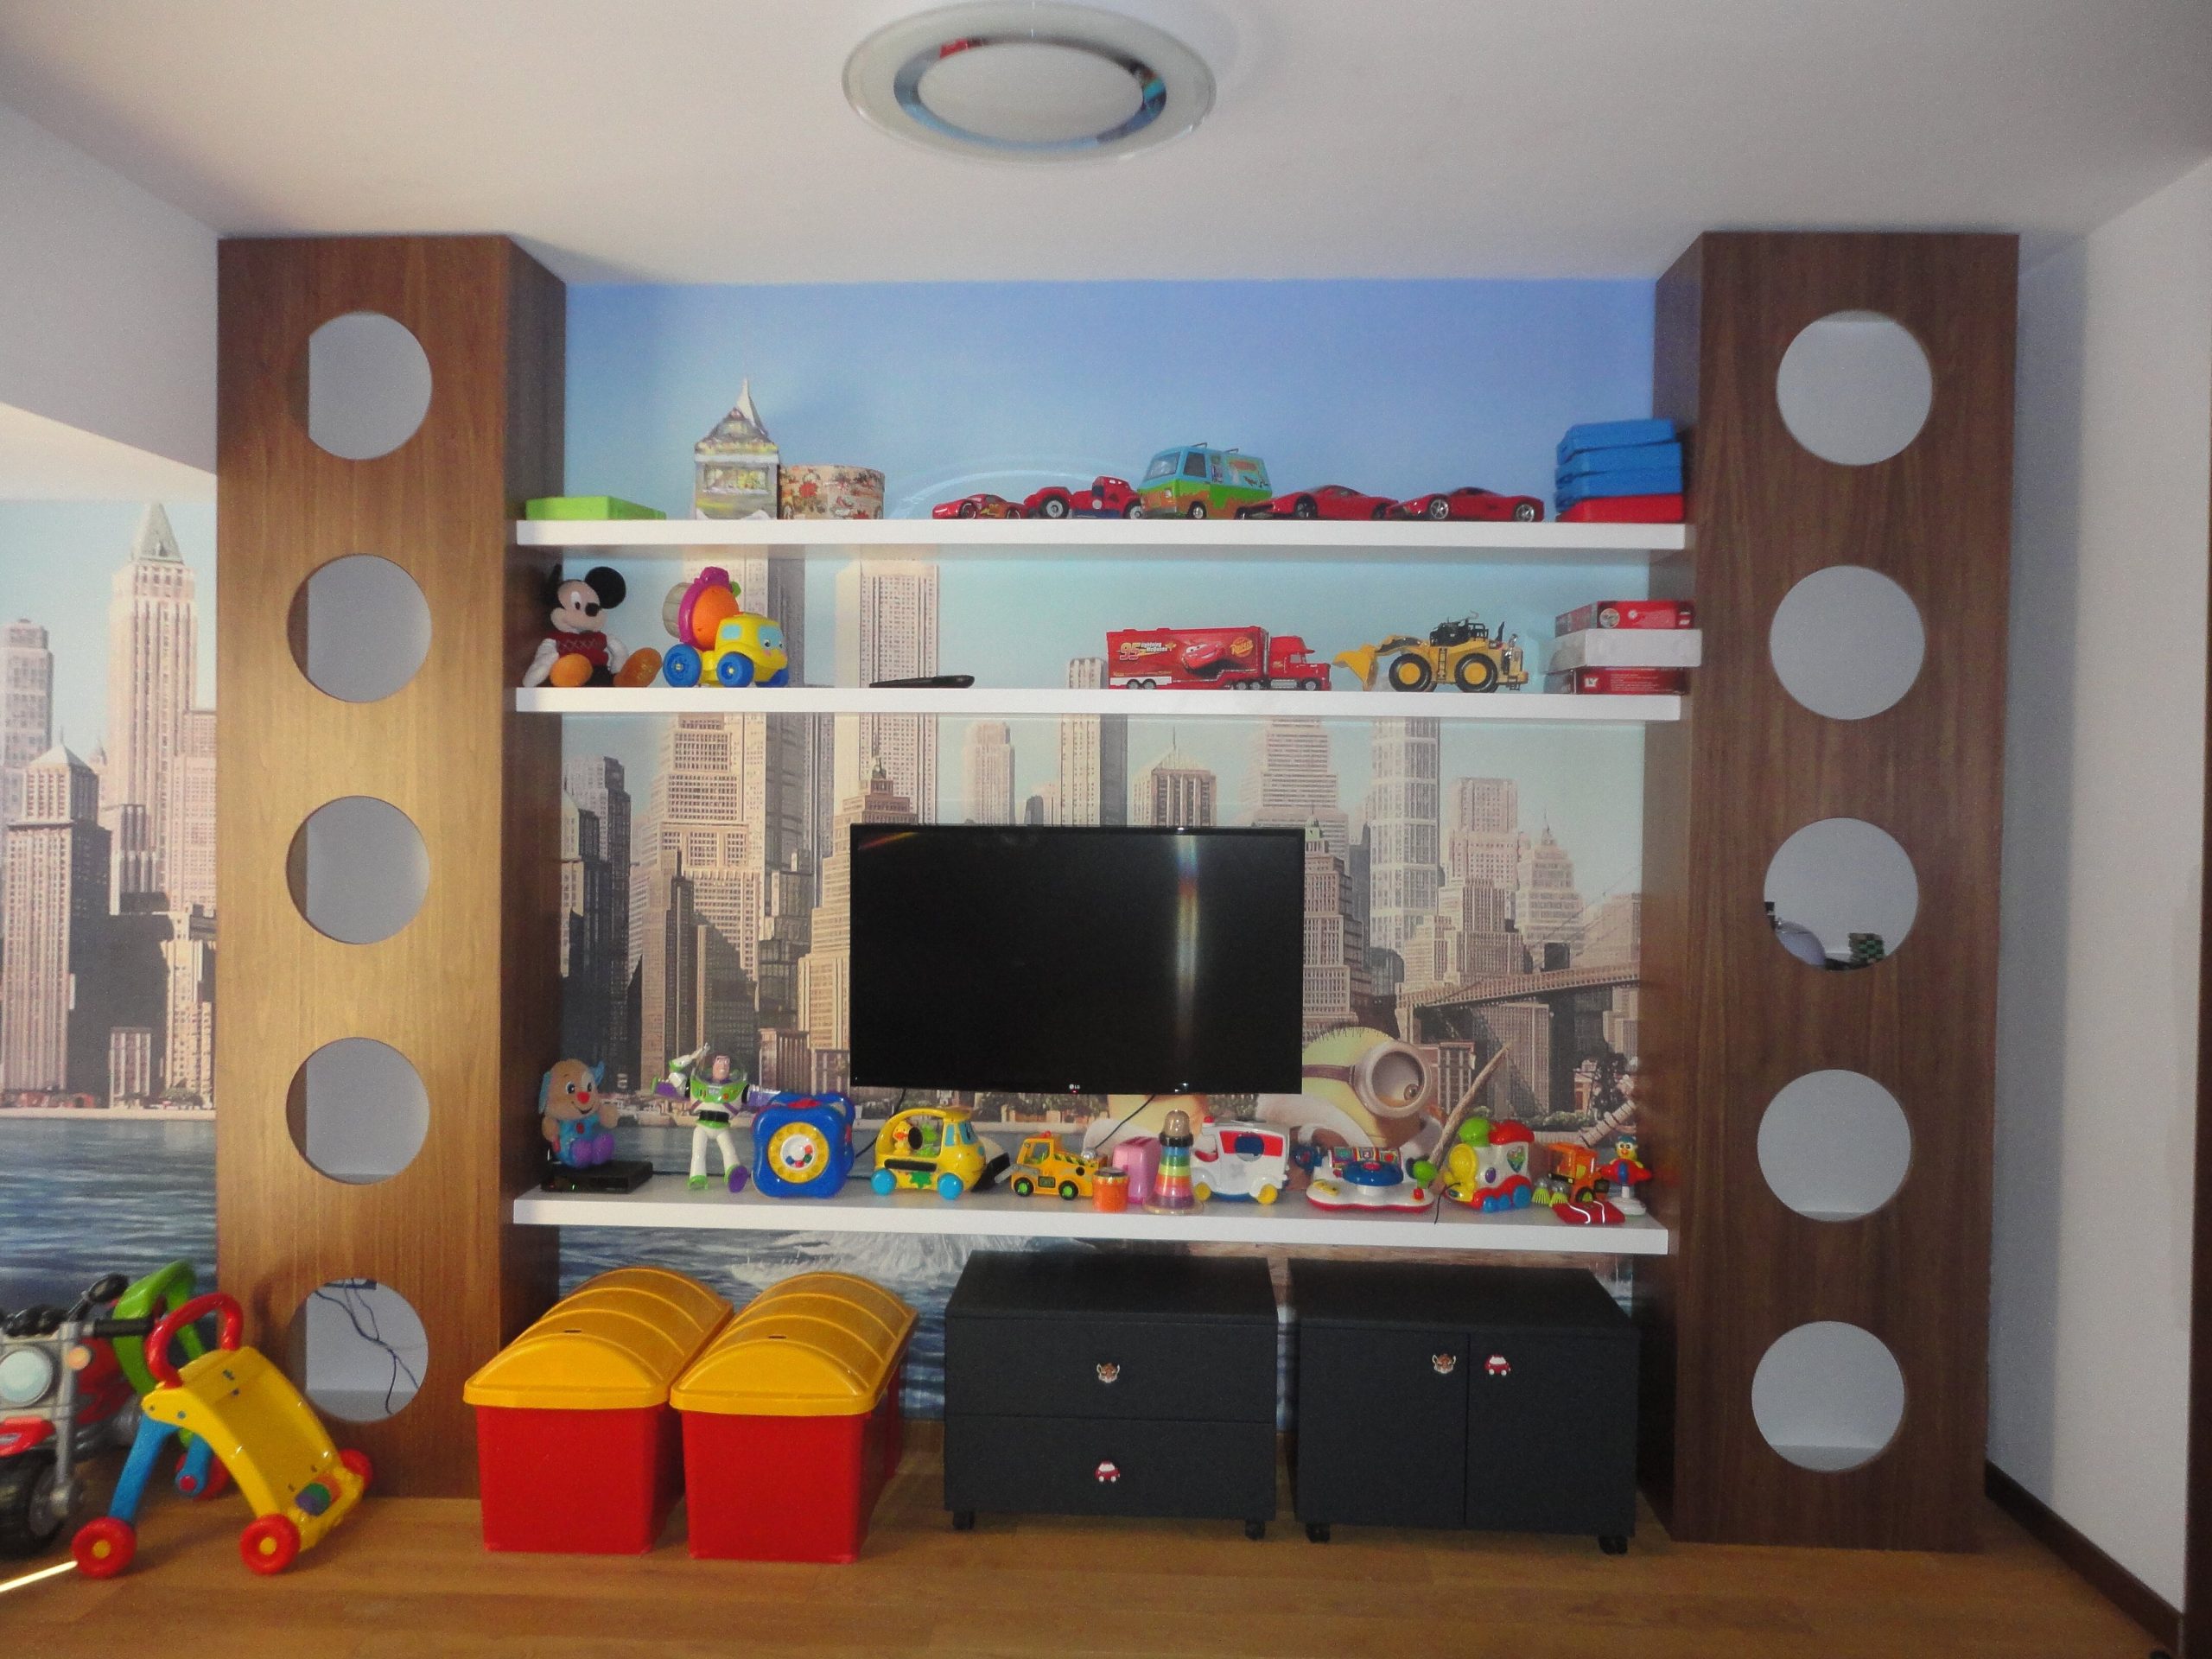 Kids room furniture made from veneer walnut mdf and colored MDF